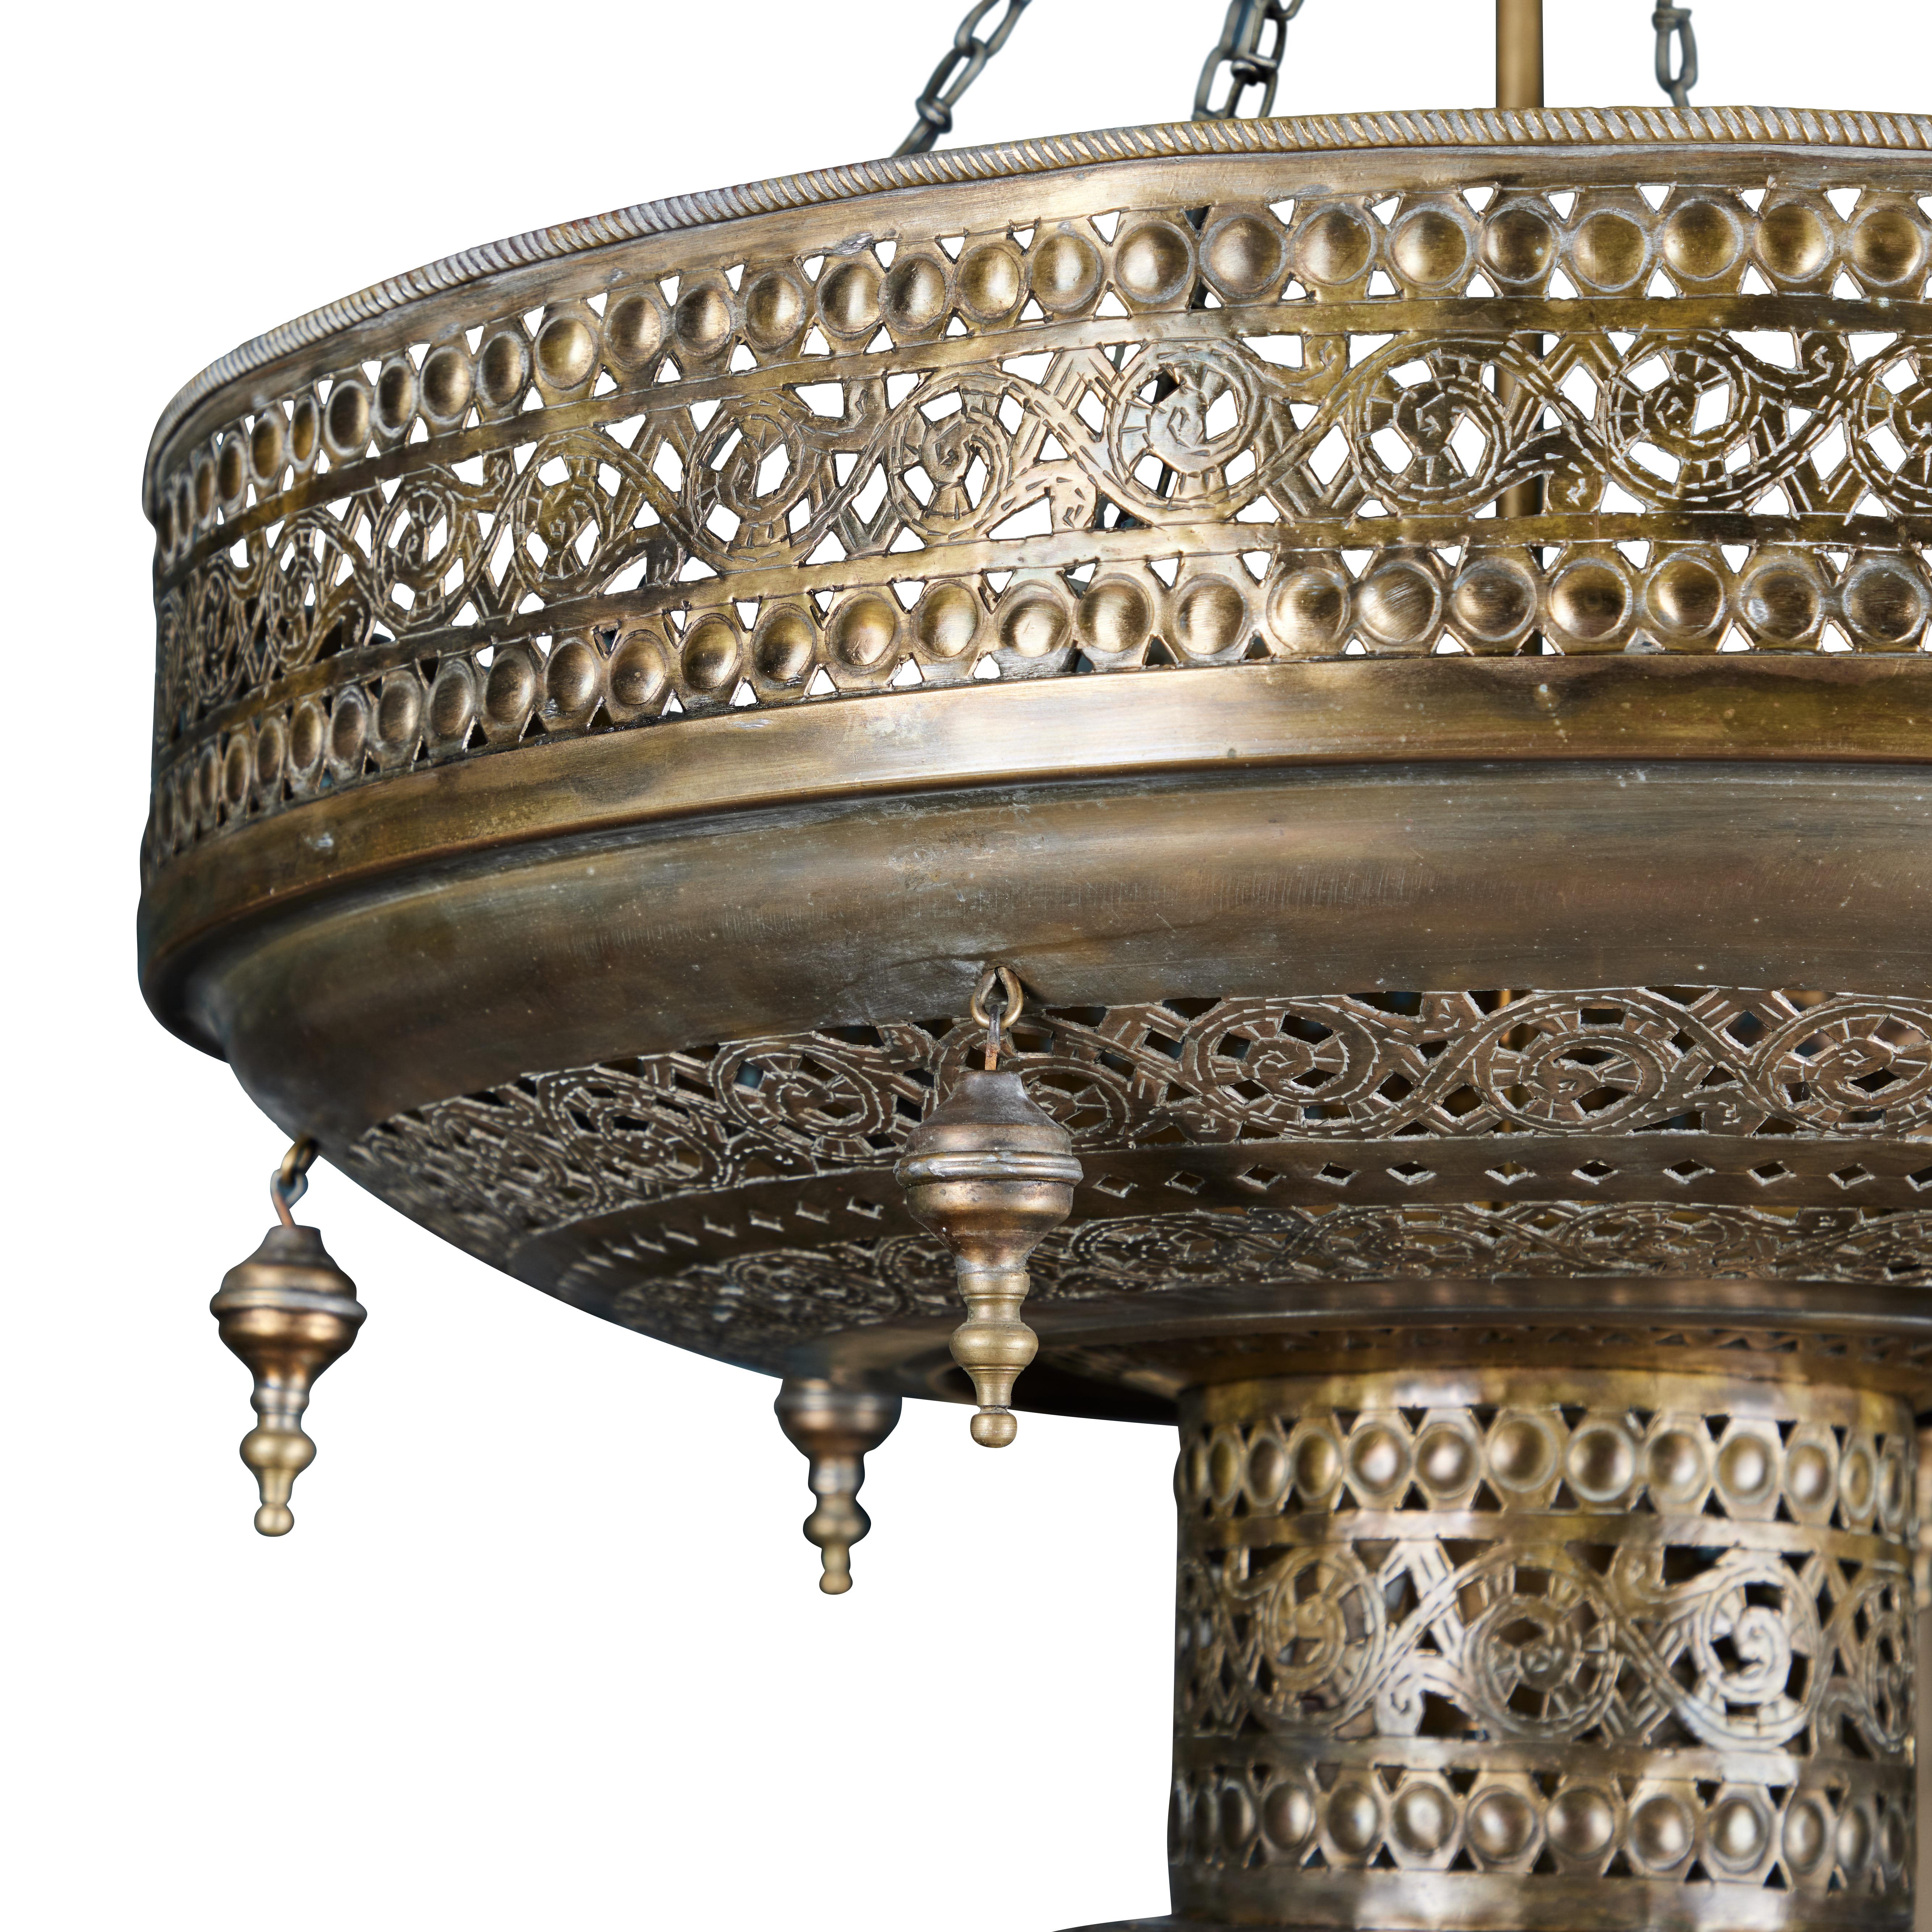 This exquisite 2-tier Moroccan light fixture is handcrafted and cut with fine delicate pierced panel designs and adorned with ornamental brass drops. It has a beautiful Moorish bronze patina finish and is a stunning piece of art as well as a